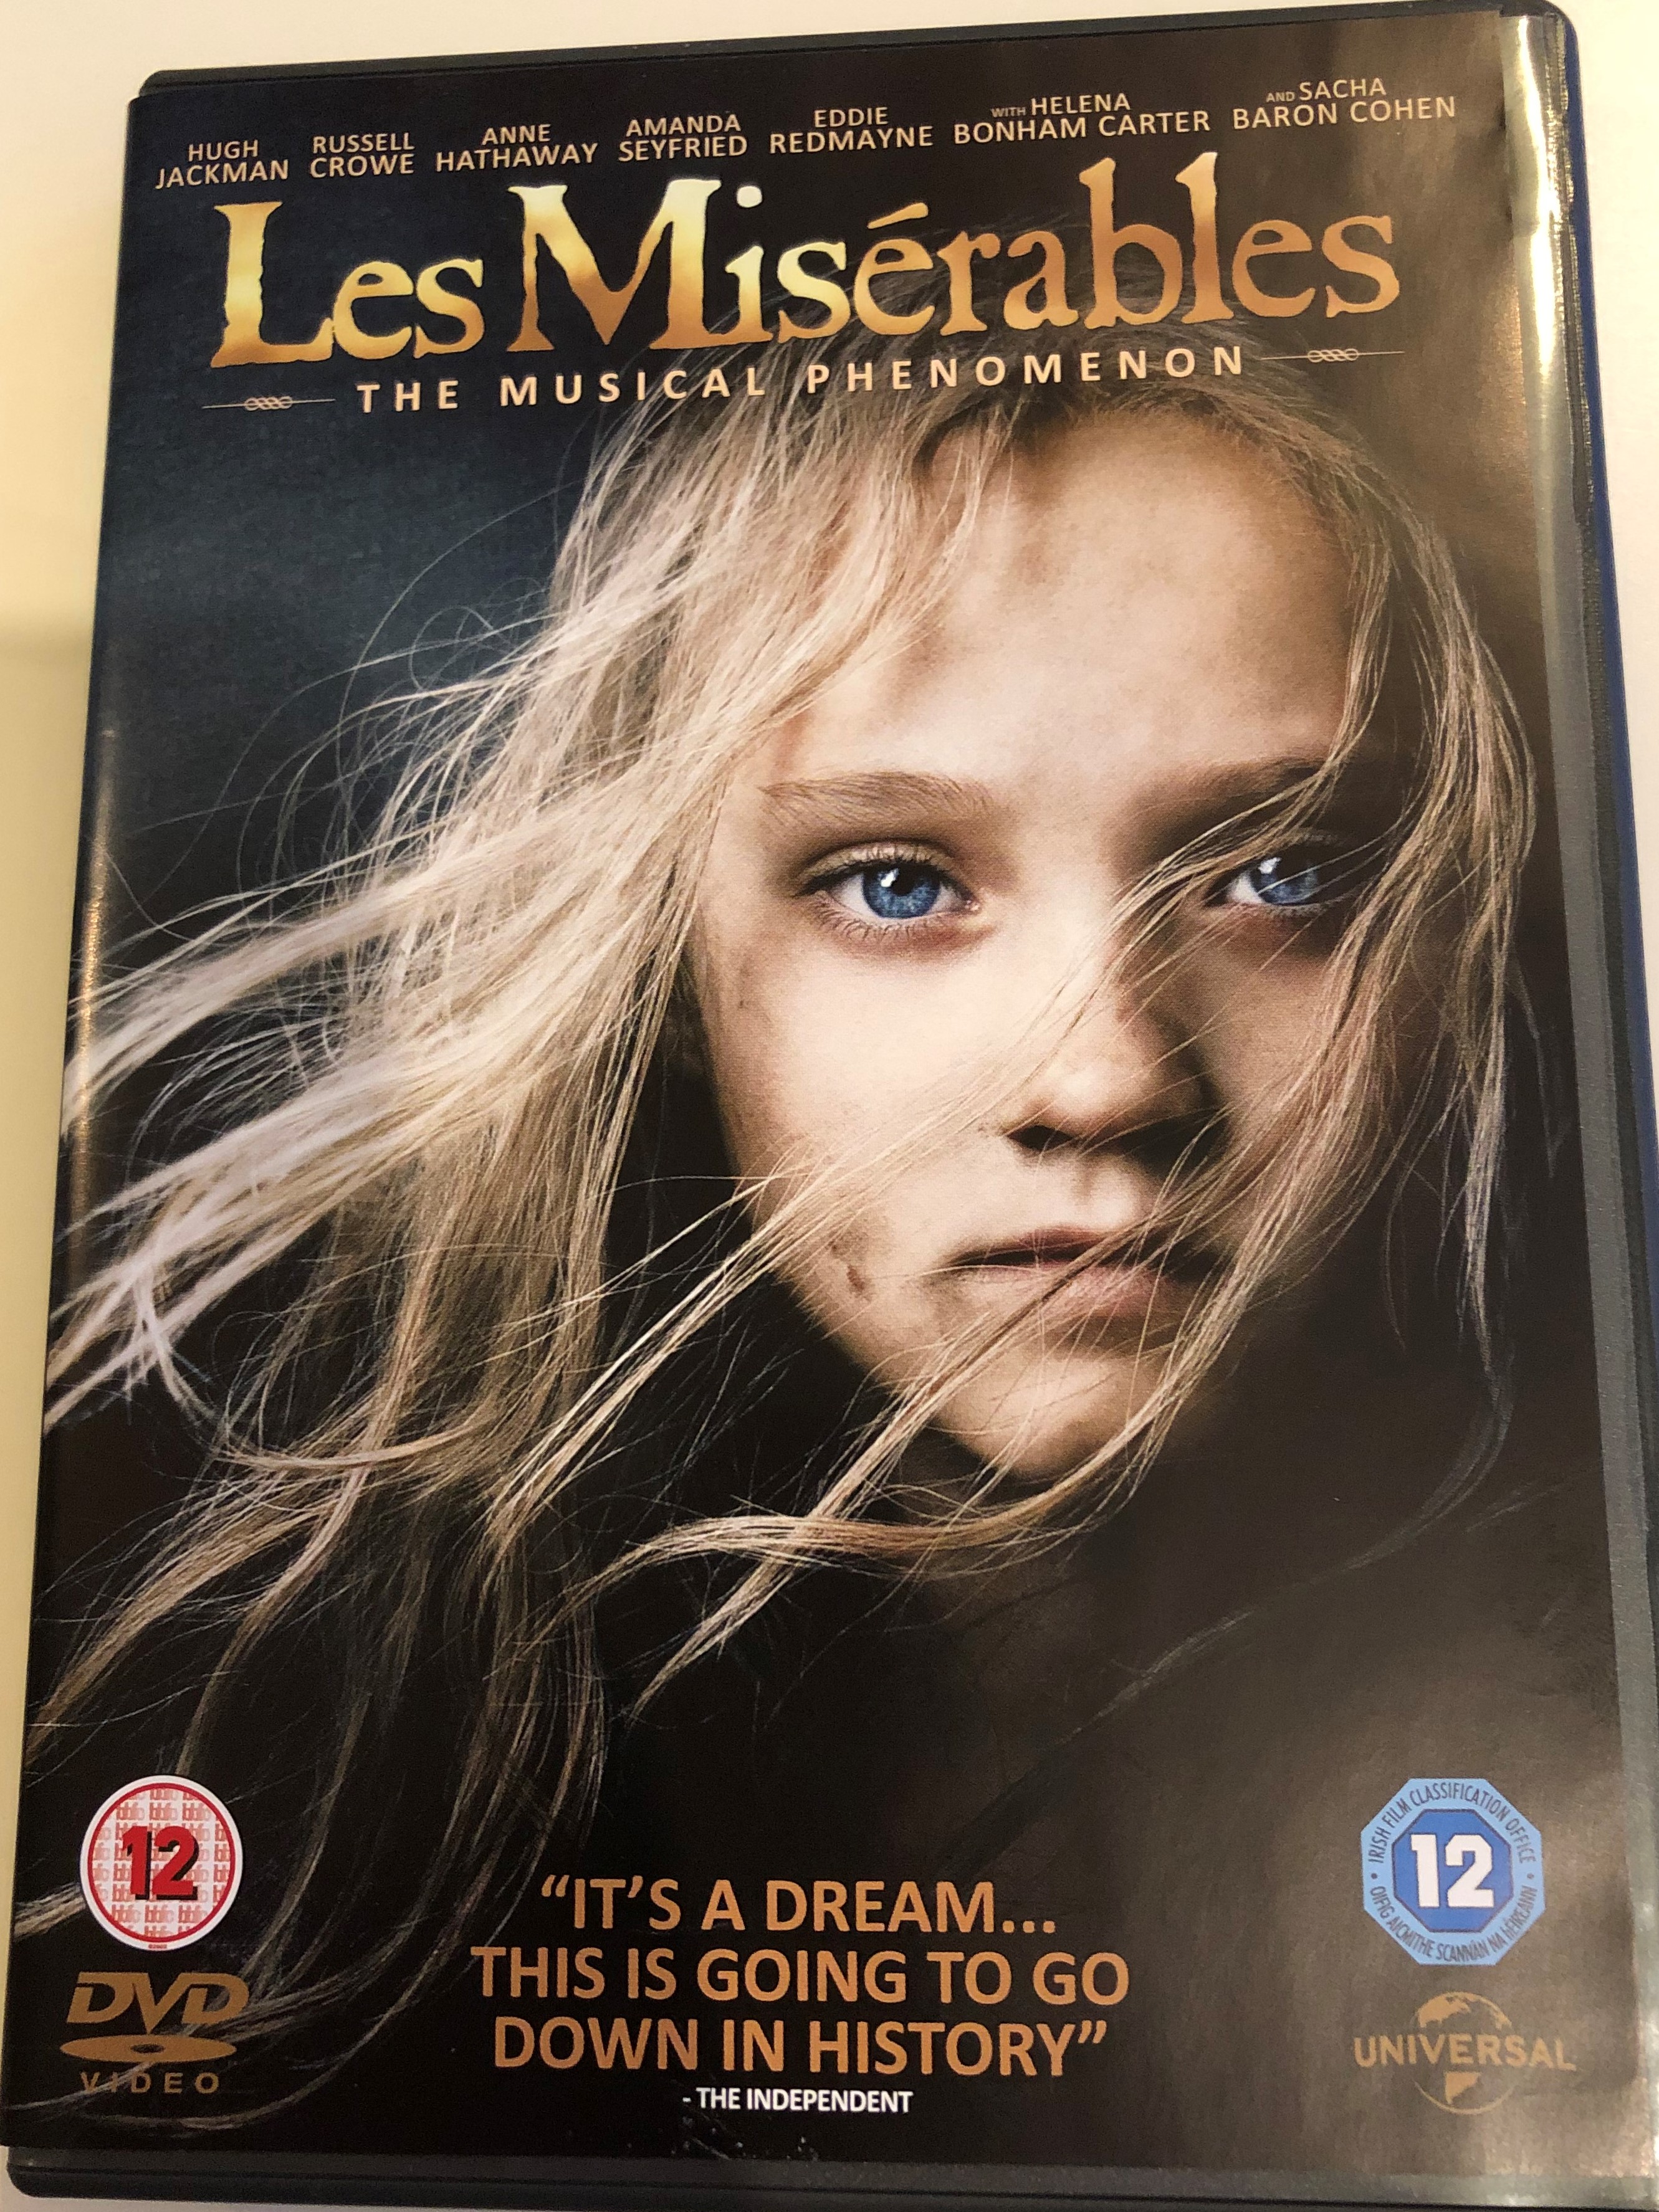 les-mis-rables-dvd-2012-the-musical-phenomenon-directed-by-tom-hooper-1.jpg